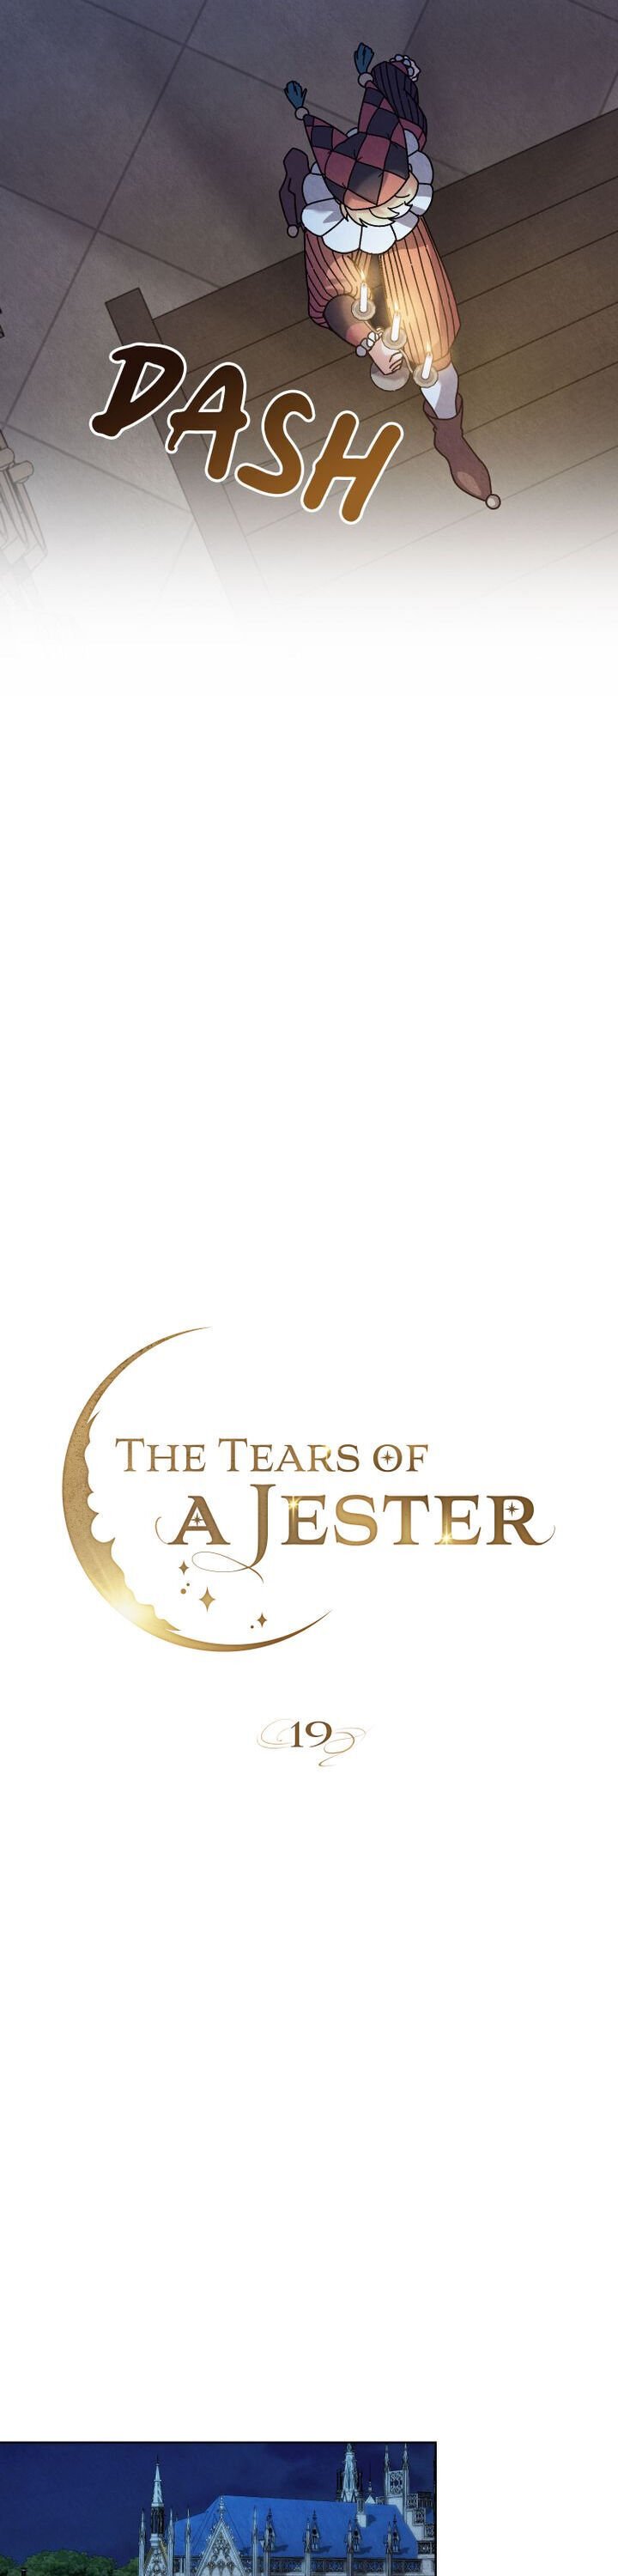 The Tears of a Jester chapter 19